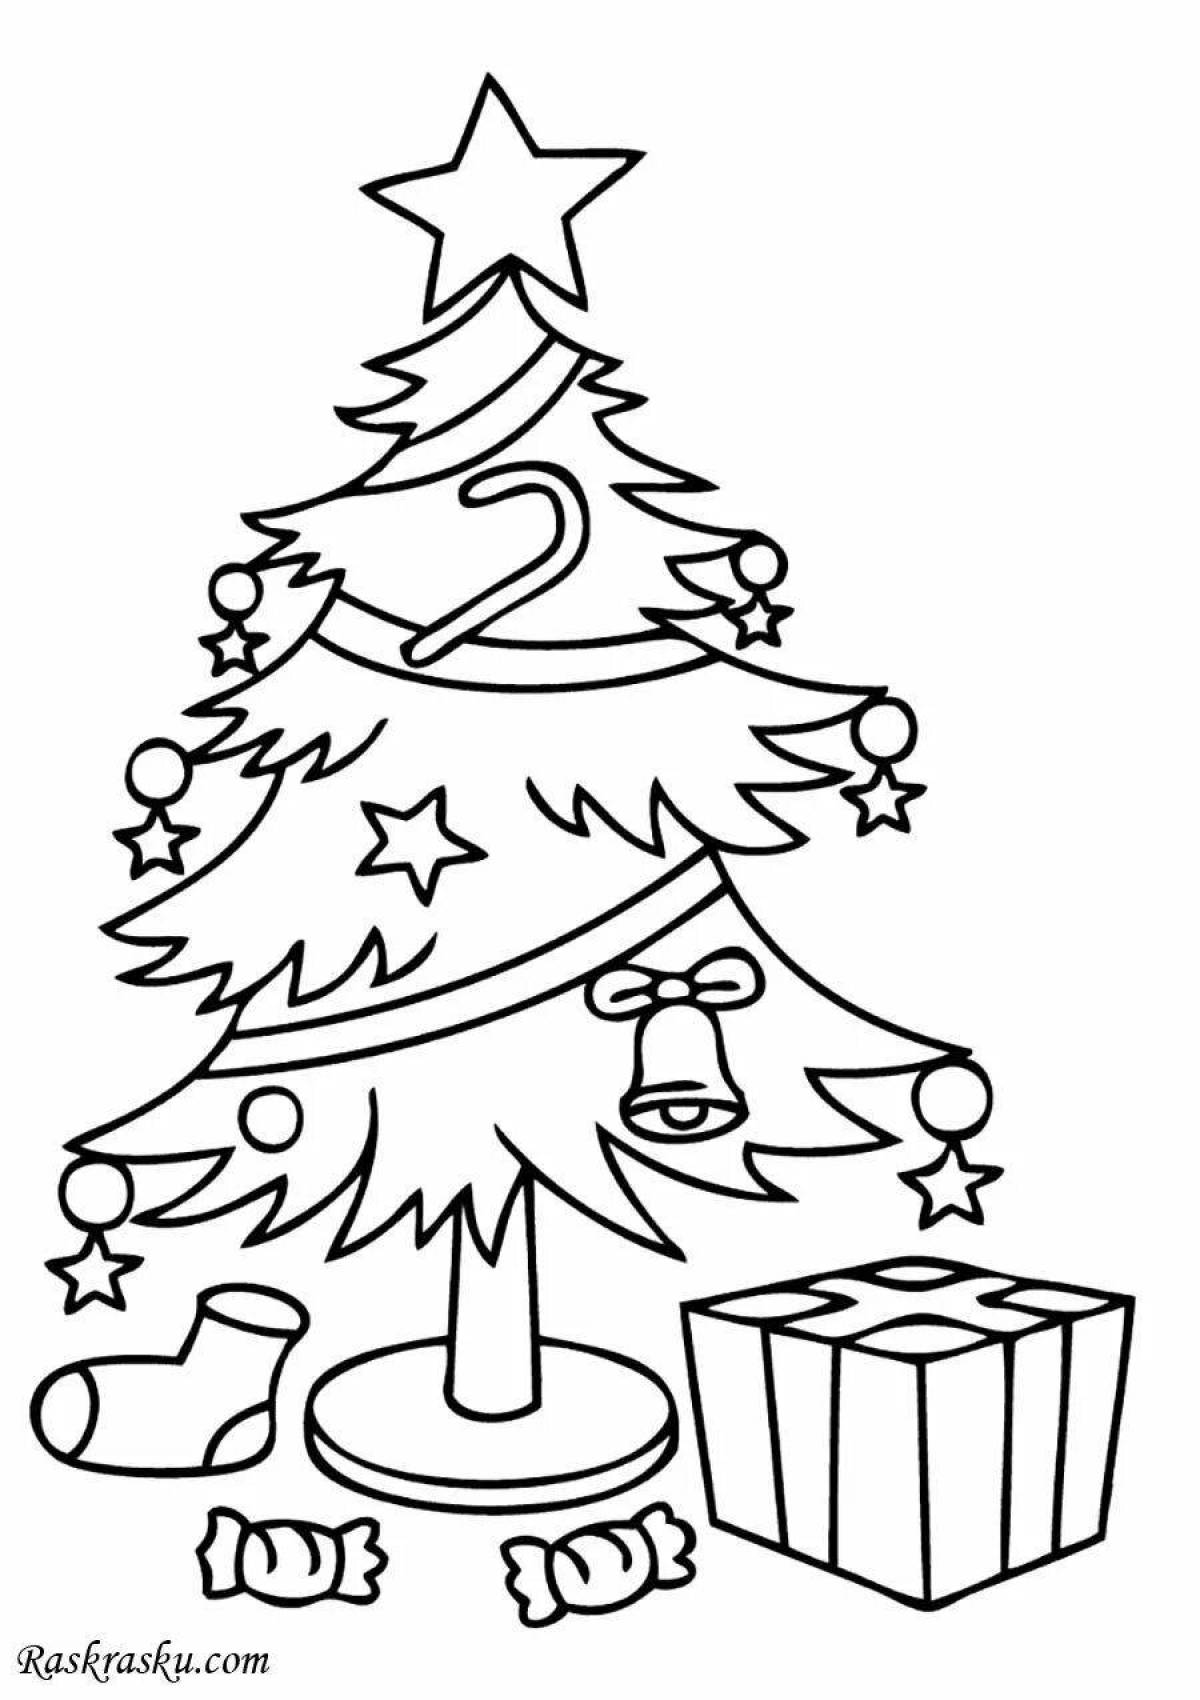 Glitter Christmas tree coloring page